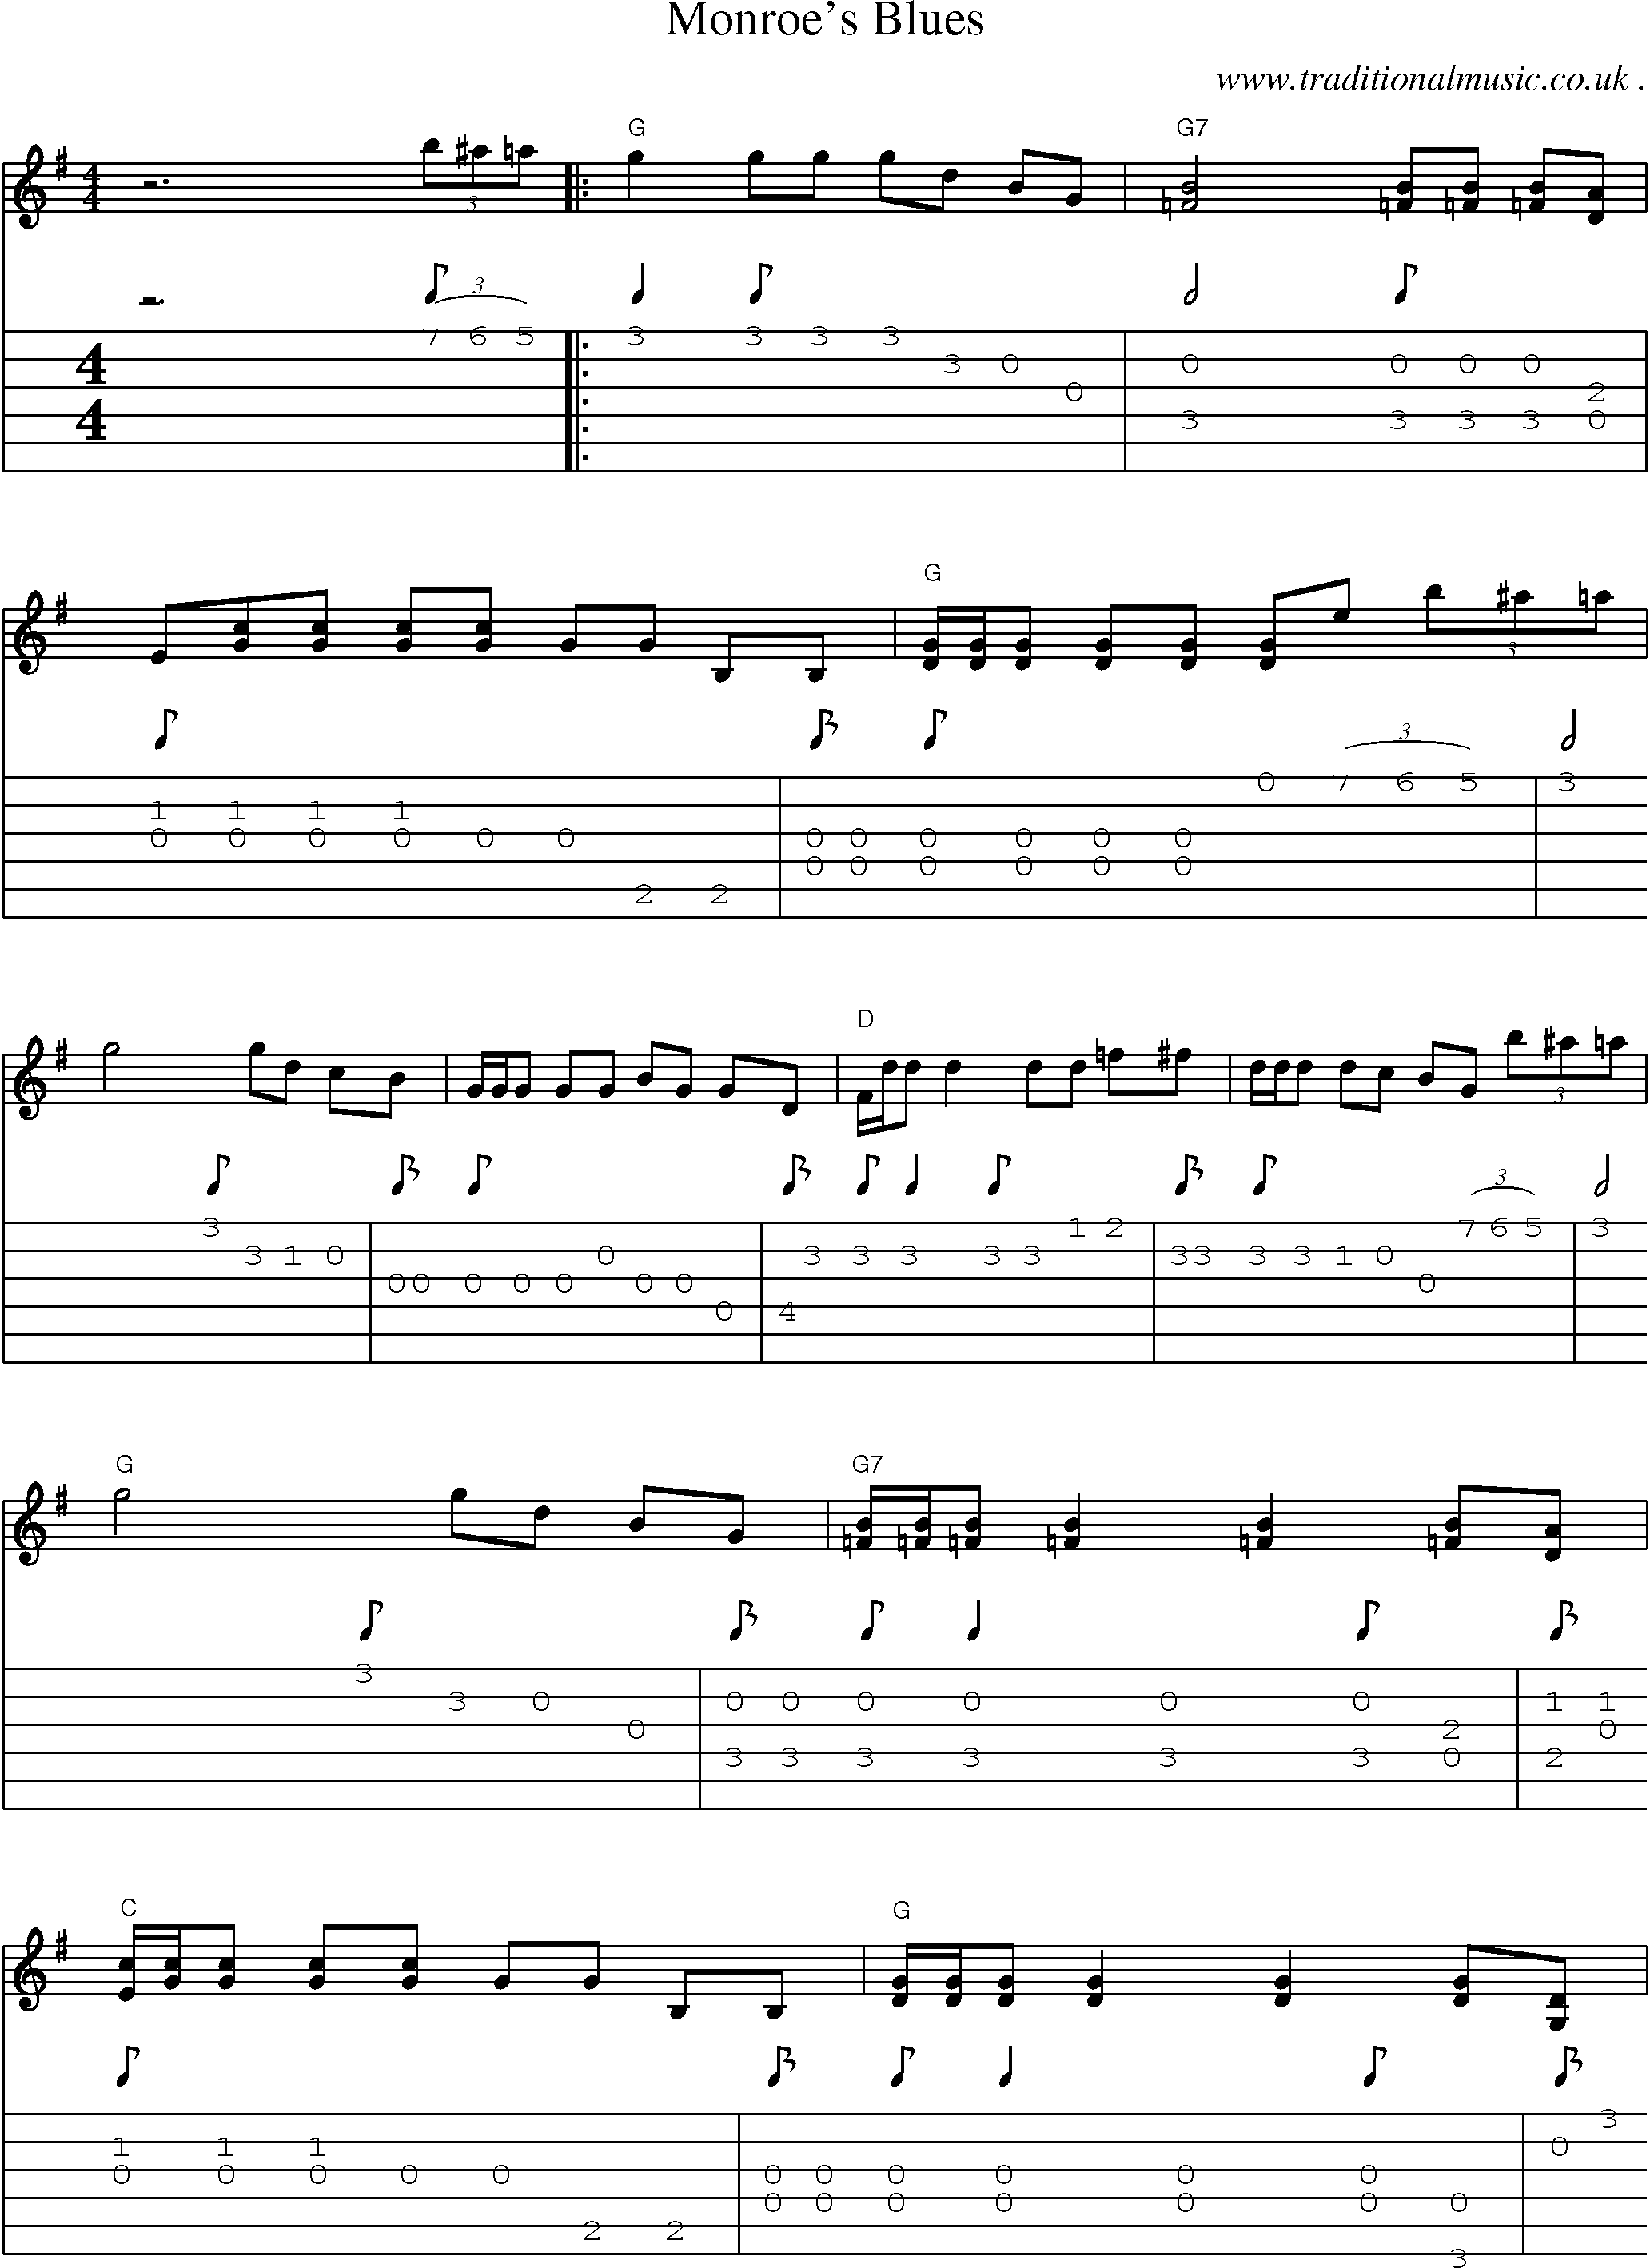 Music Score and Guitar Tabs for Monroes Blues